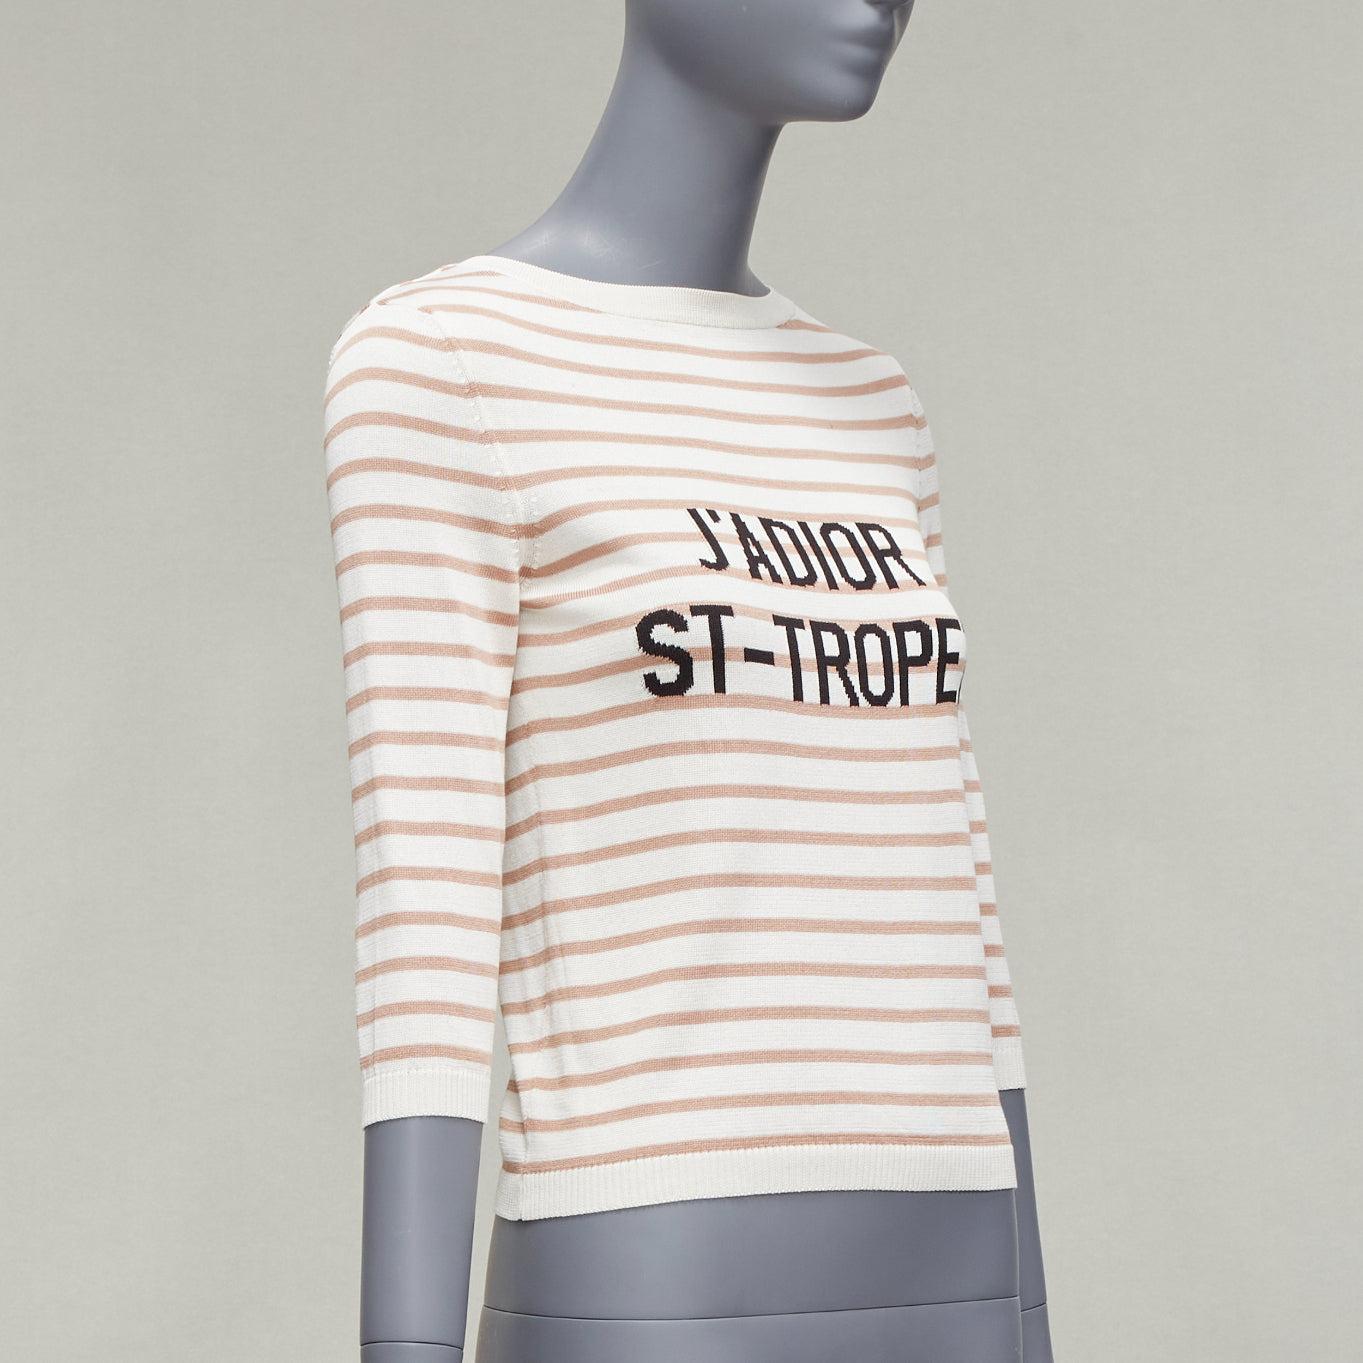 CHRISTIAN DIOR Jadior St Tropez beige cream stripe cropped sweater FR34 XS In Good Condition For Sale In Hong Kong, NT